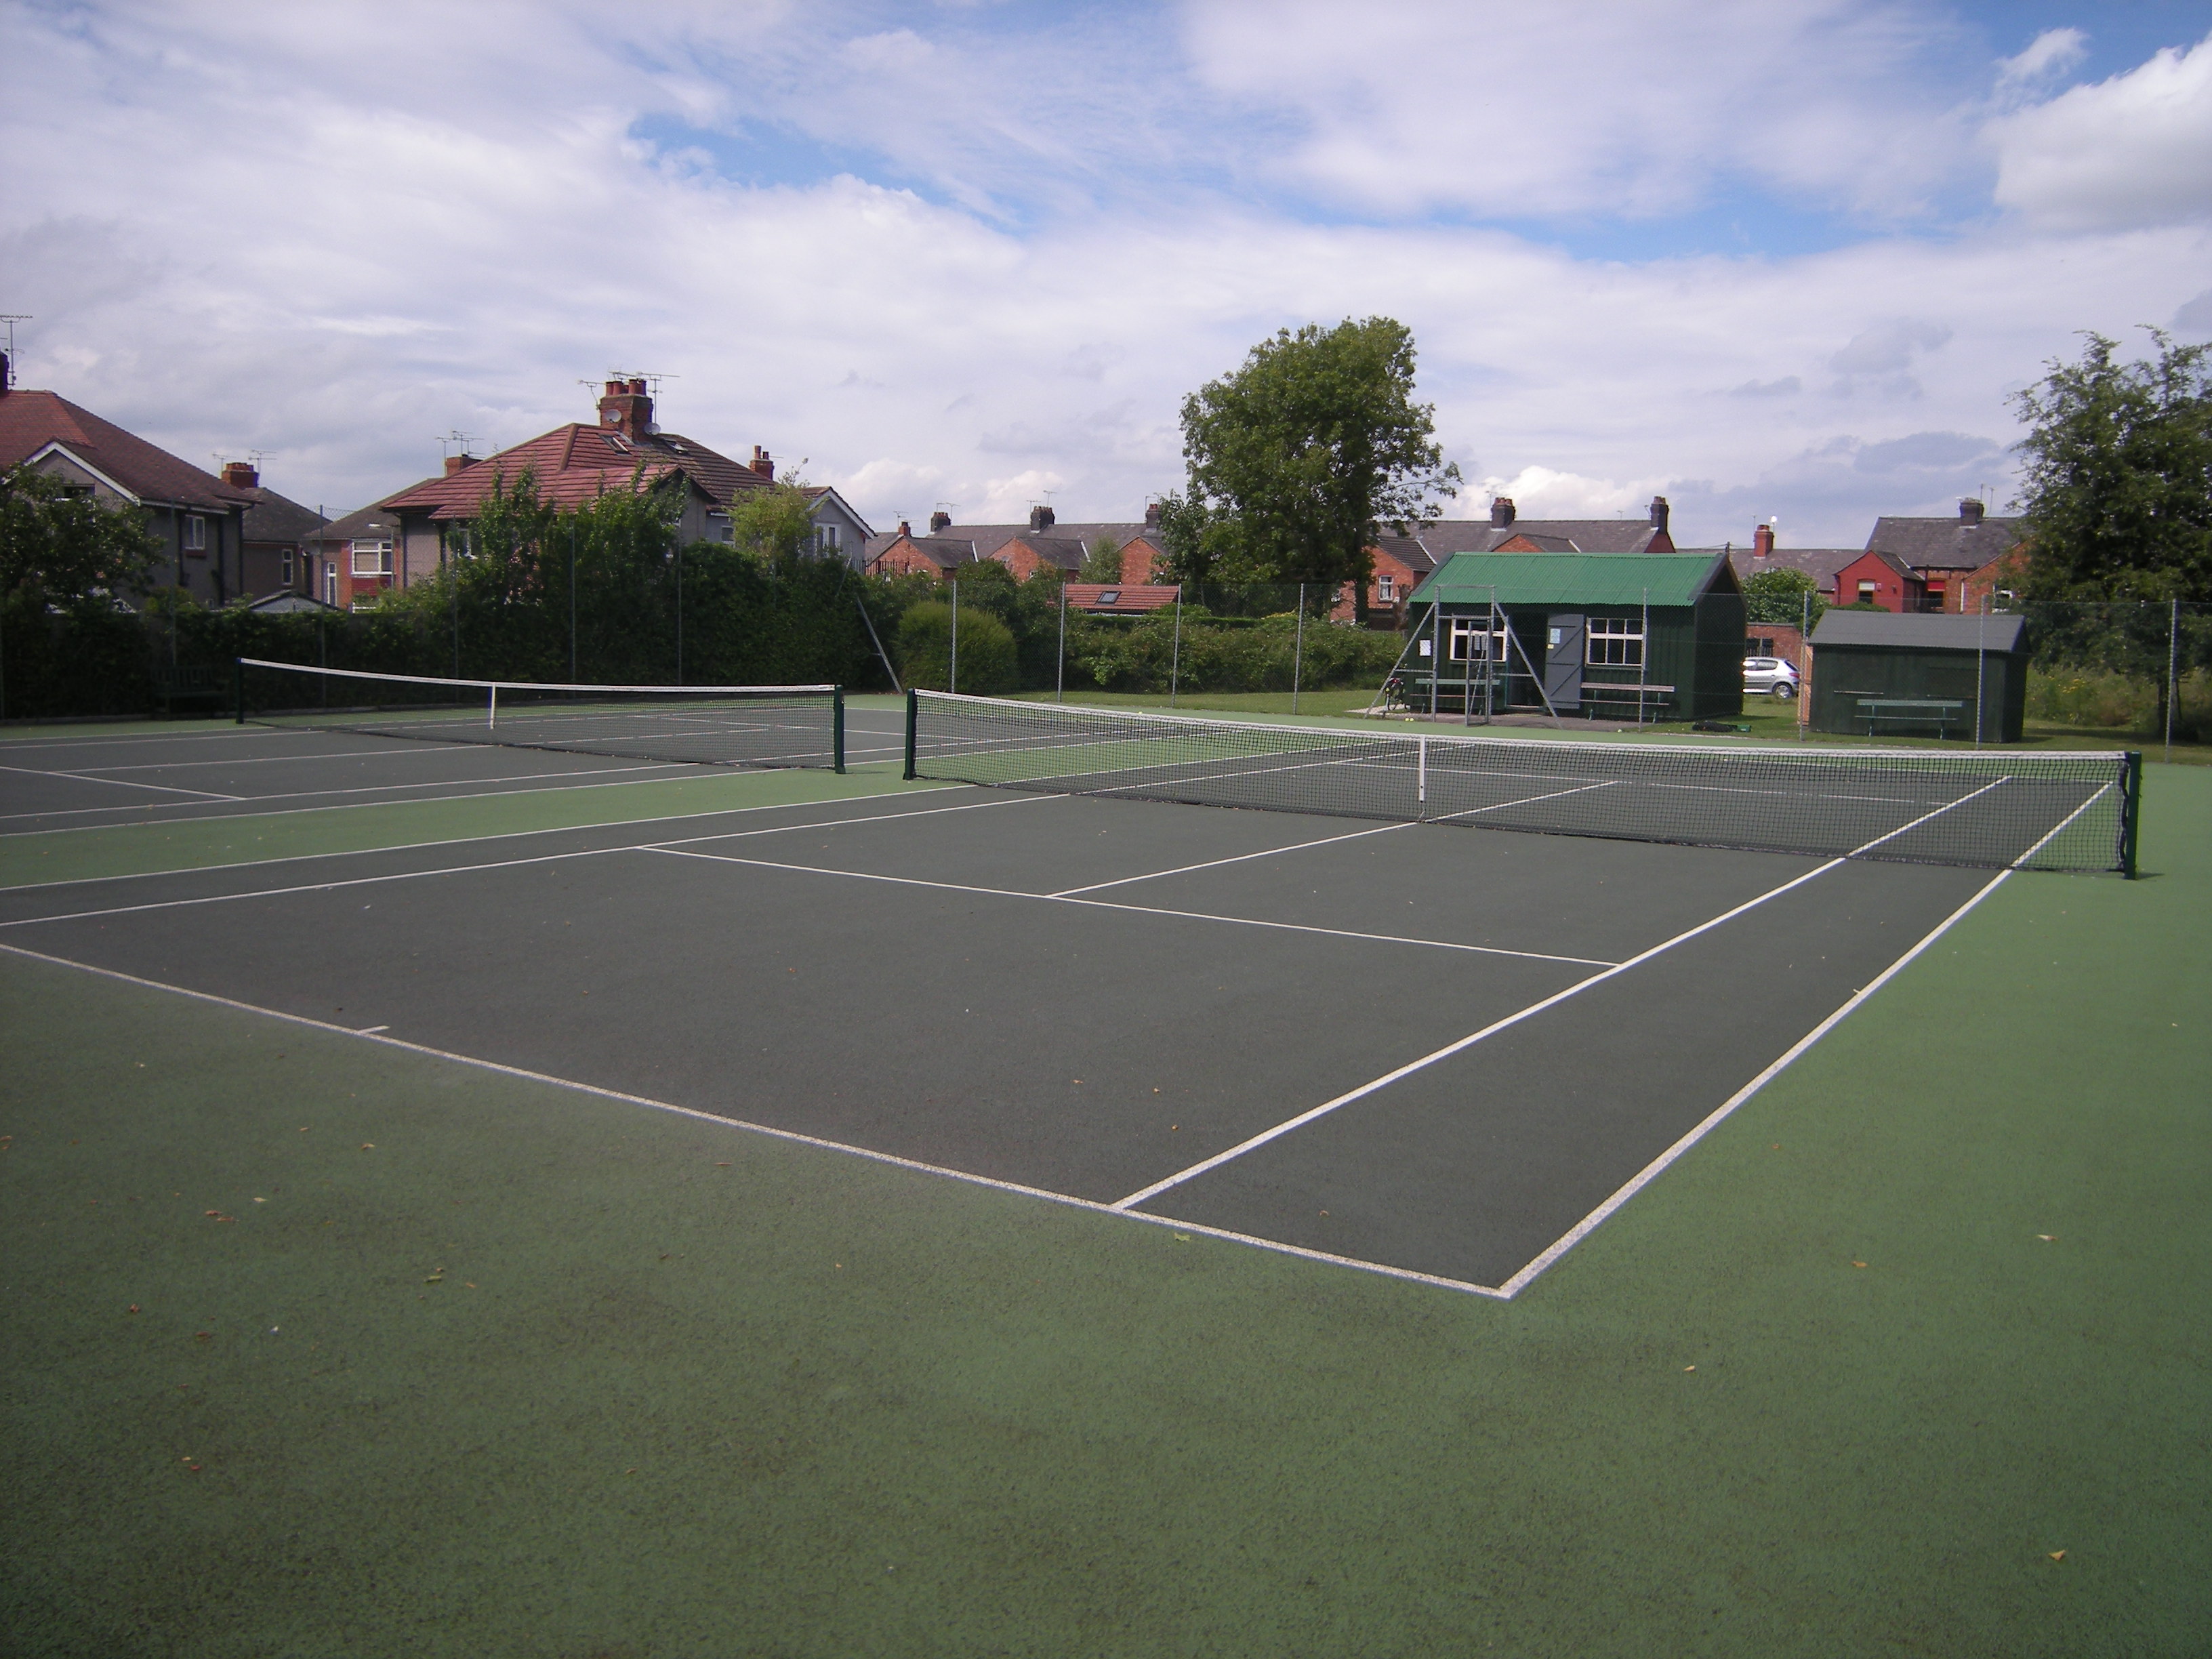 courts at crewe tennis club